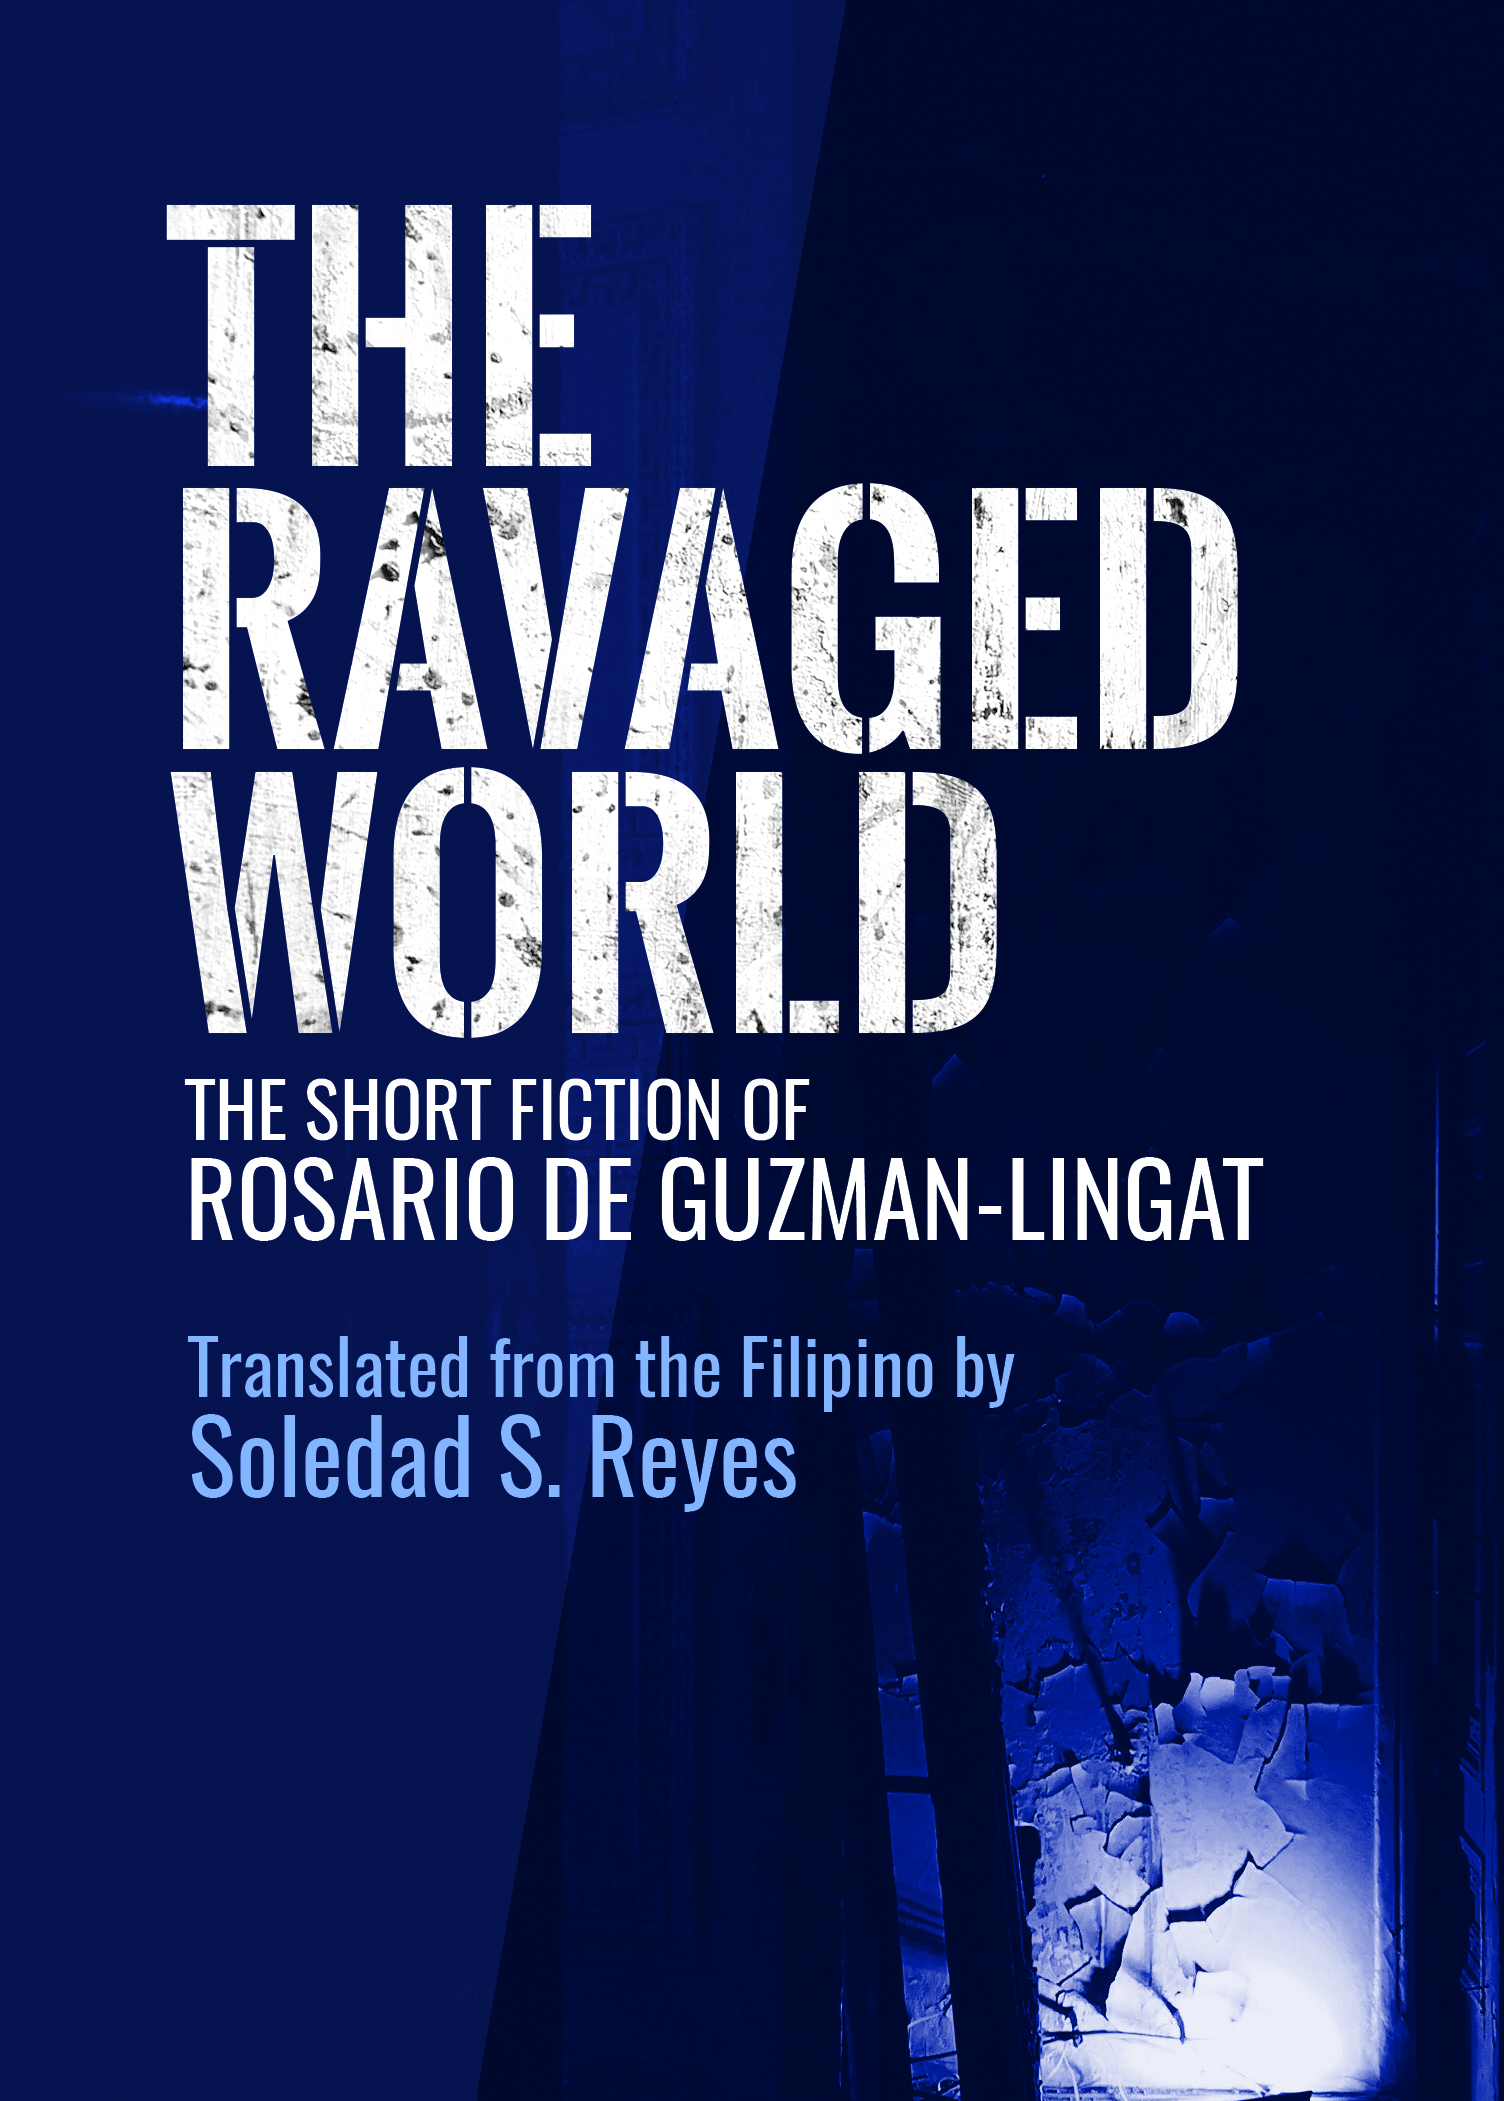 Book cover of The Ravaged World: The Short Fiction of Rosario de Guzman Lingat translated from the Filipino by Soledad S. Reyes